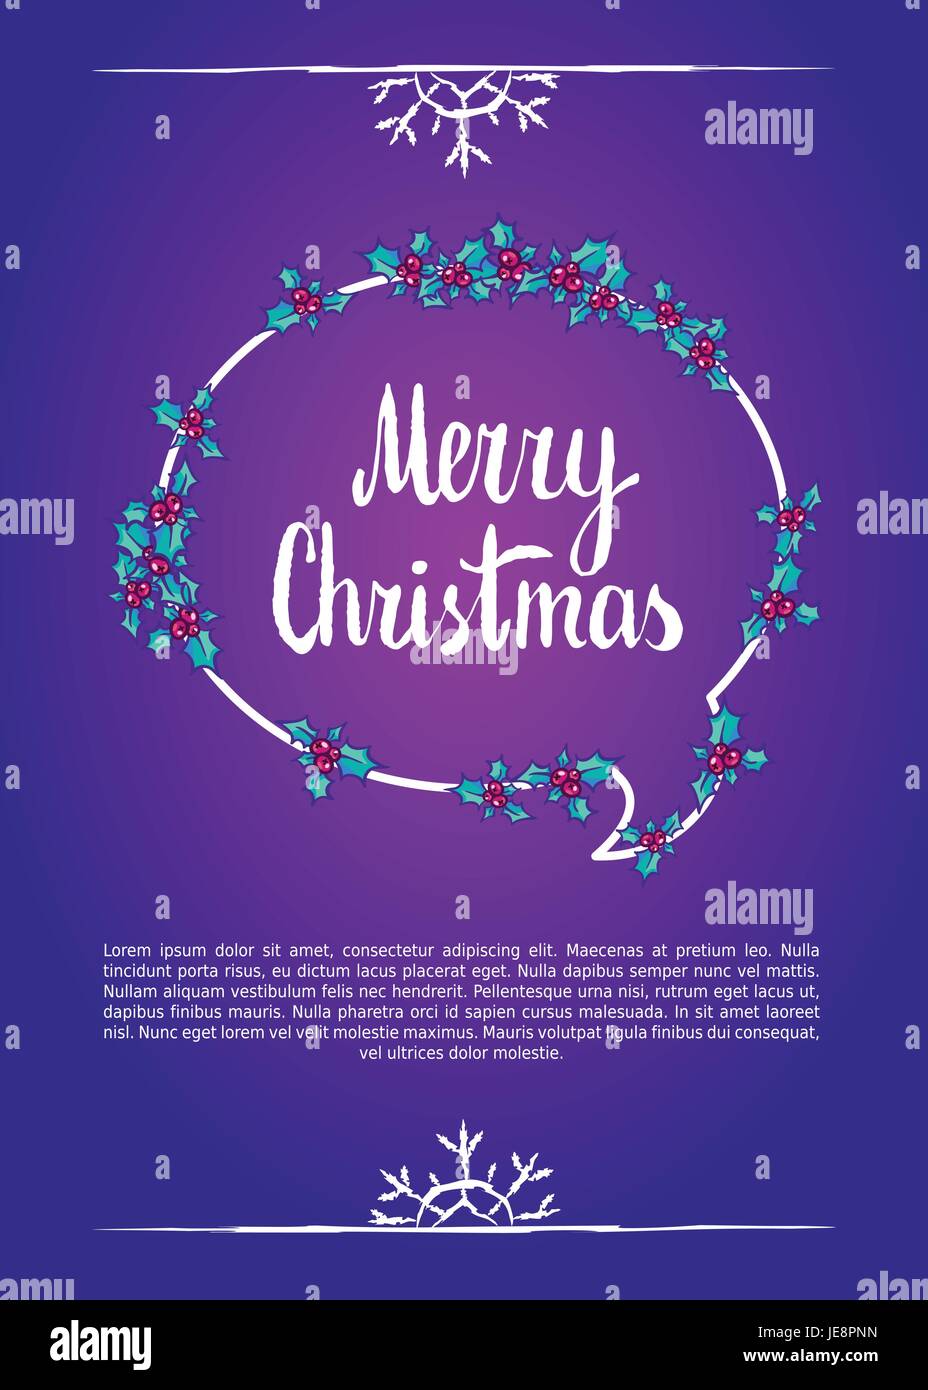 Clip art christmas wish for christmas hi-res stock photography and images -  Alamy